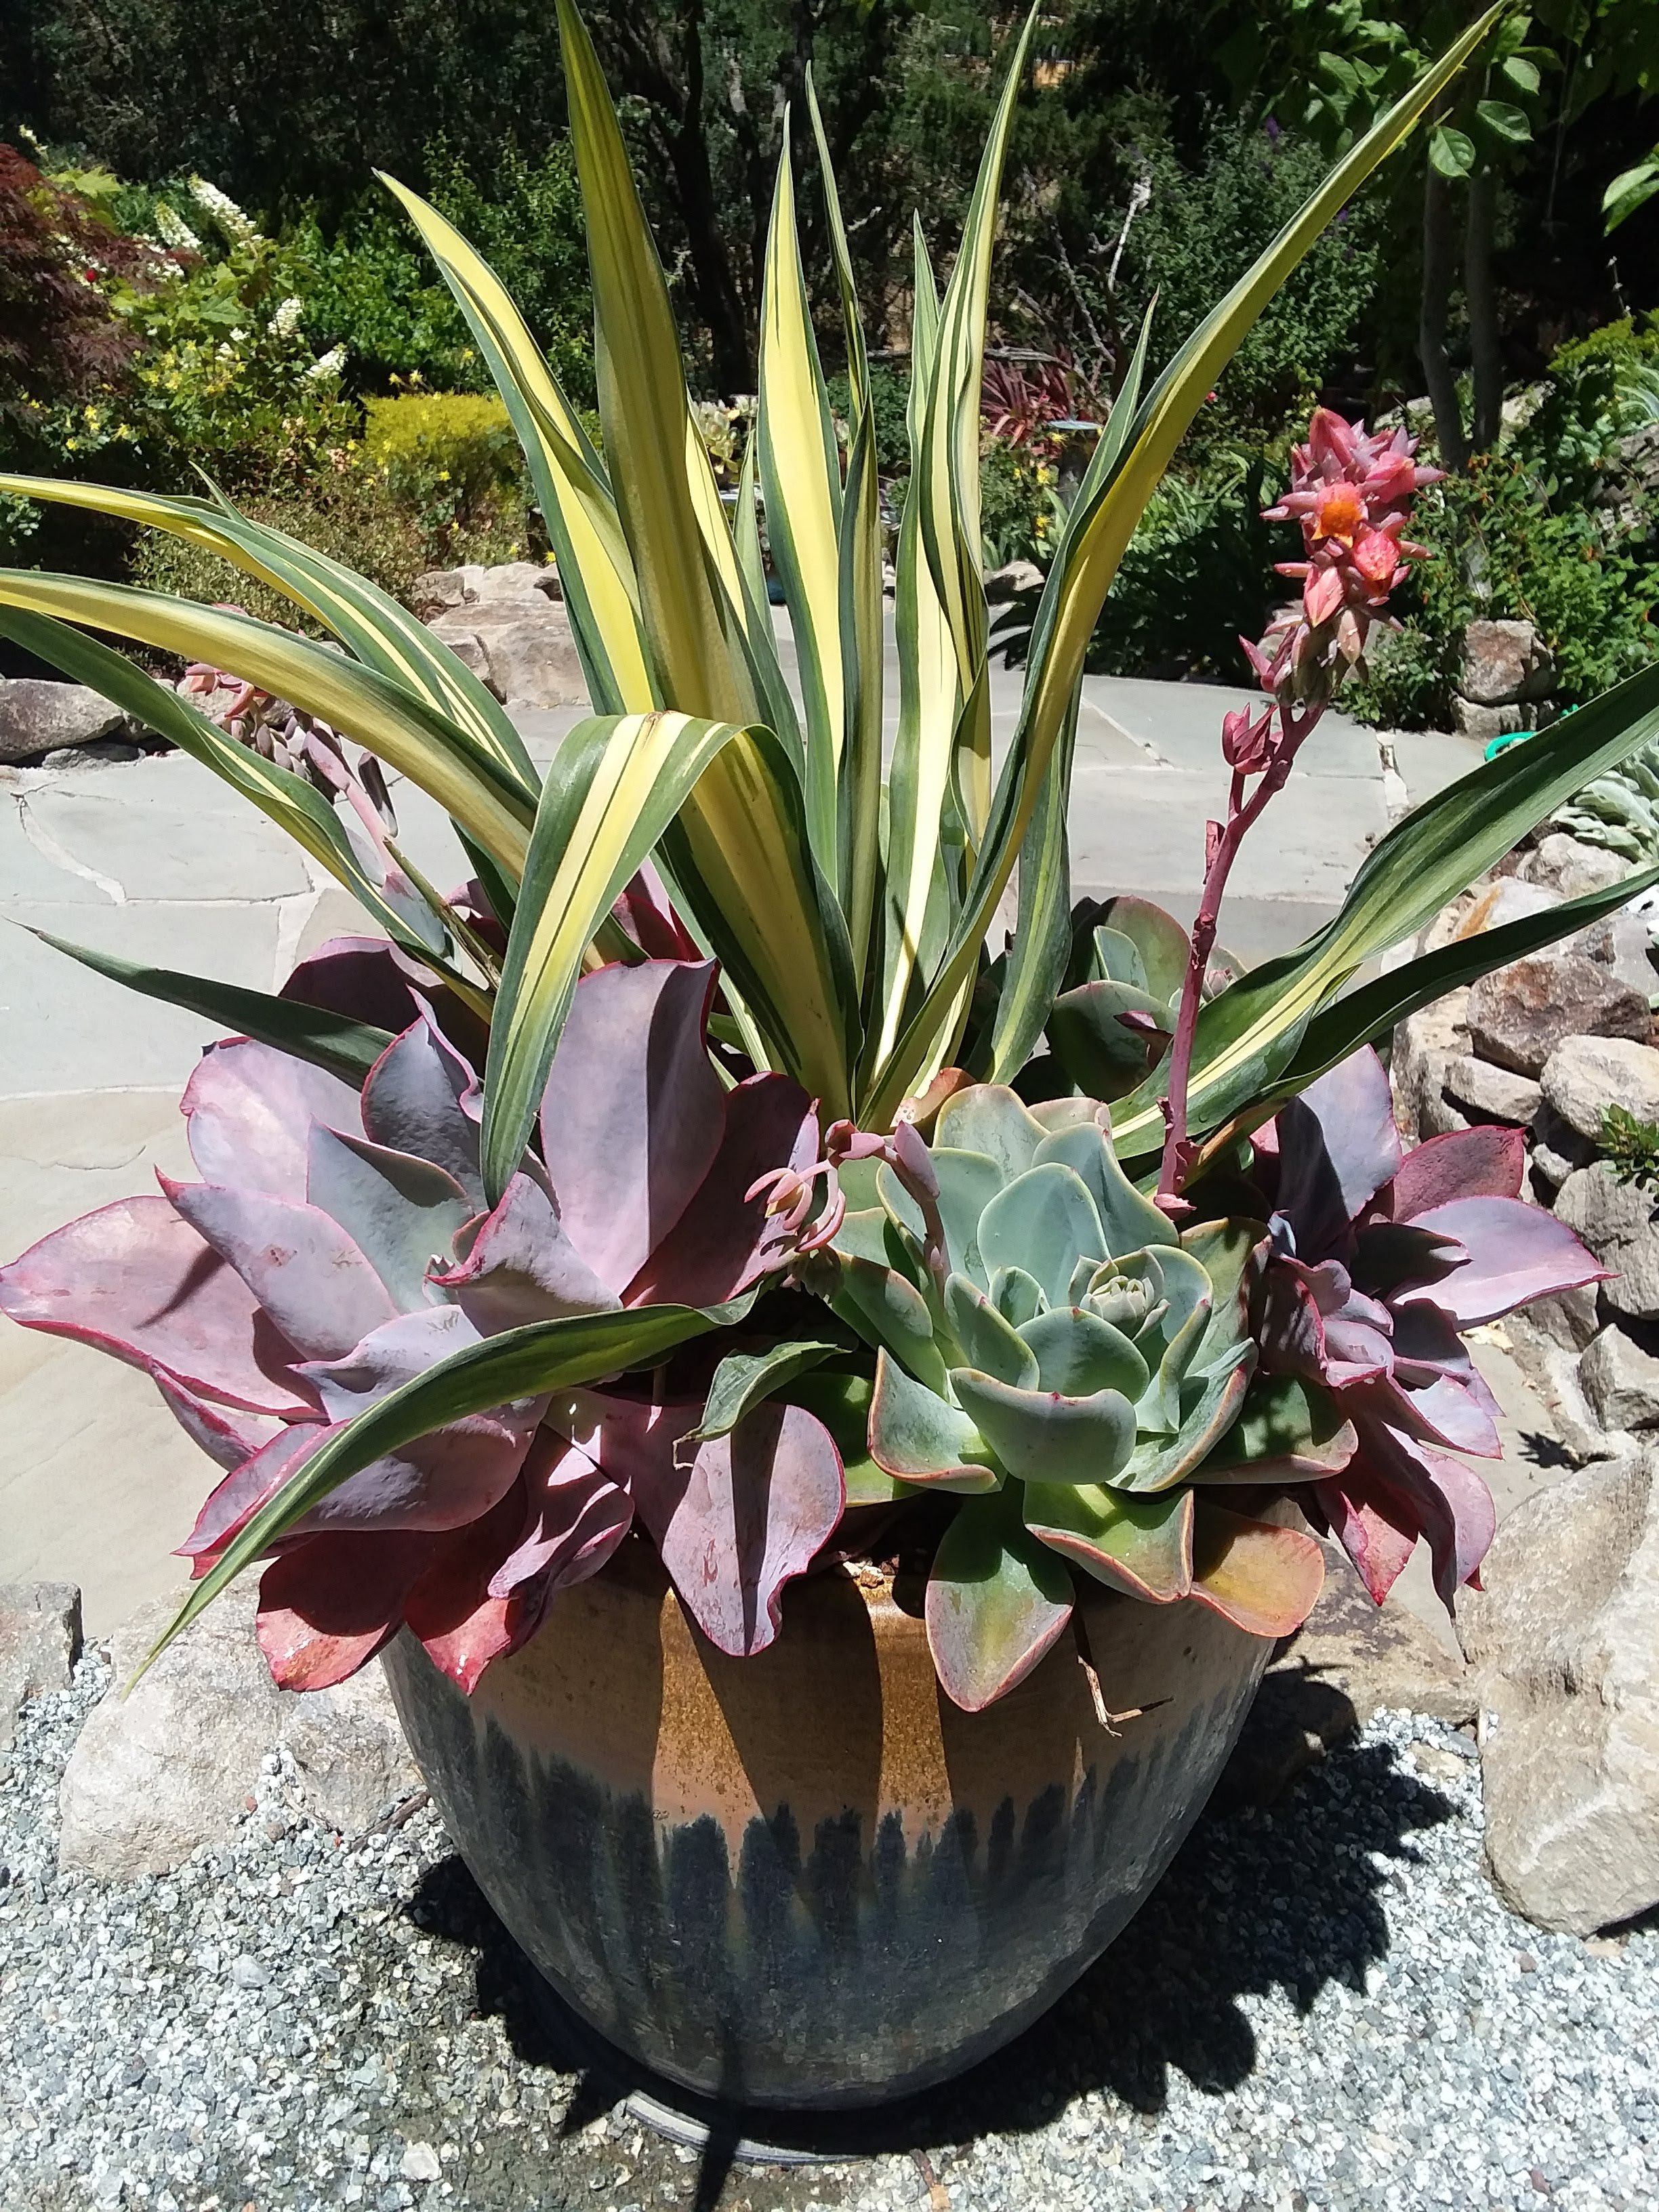 Beschorneria yuccoides Flamingo Glow and Echeveria Afterglow in Bicolor pot Sat., May 23, 2020.jpg